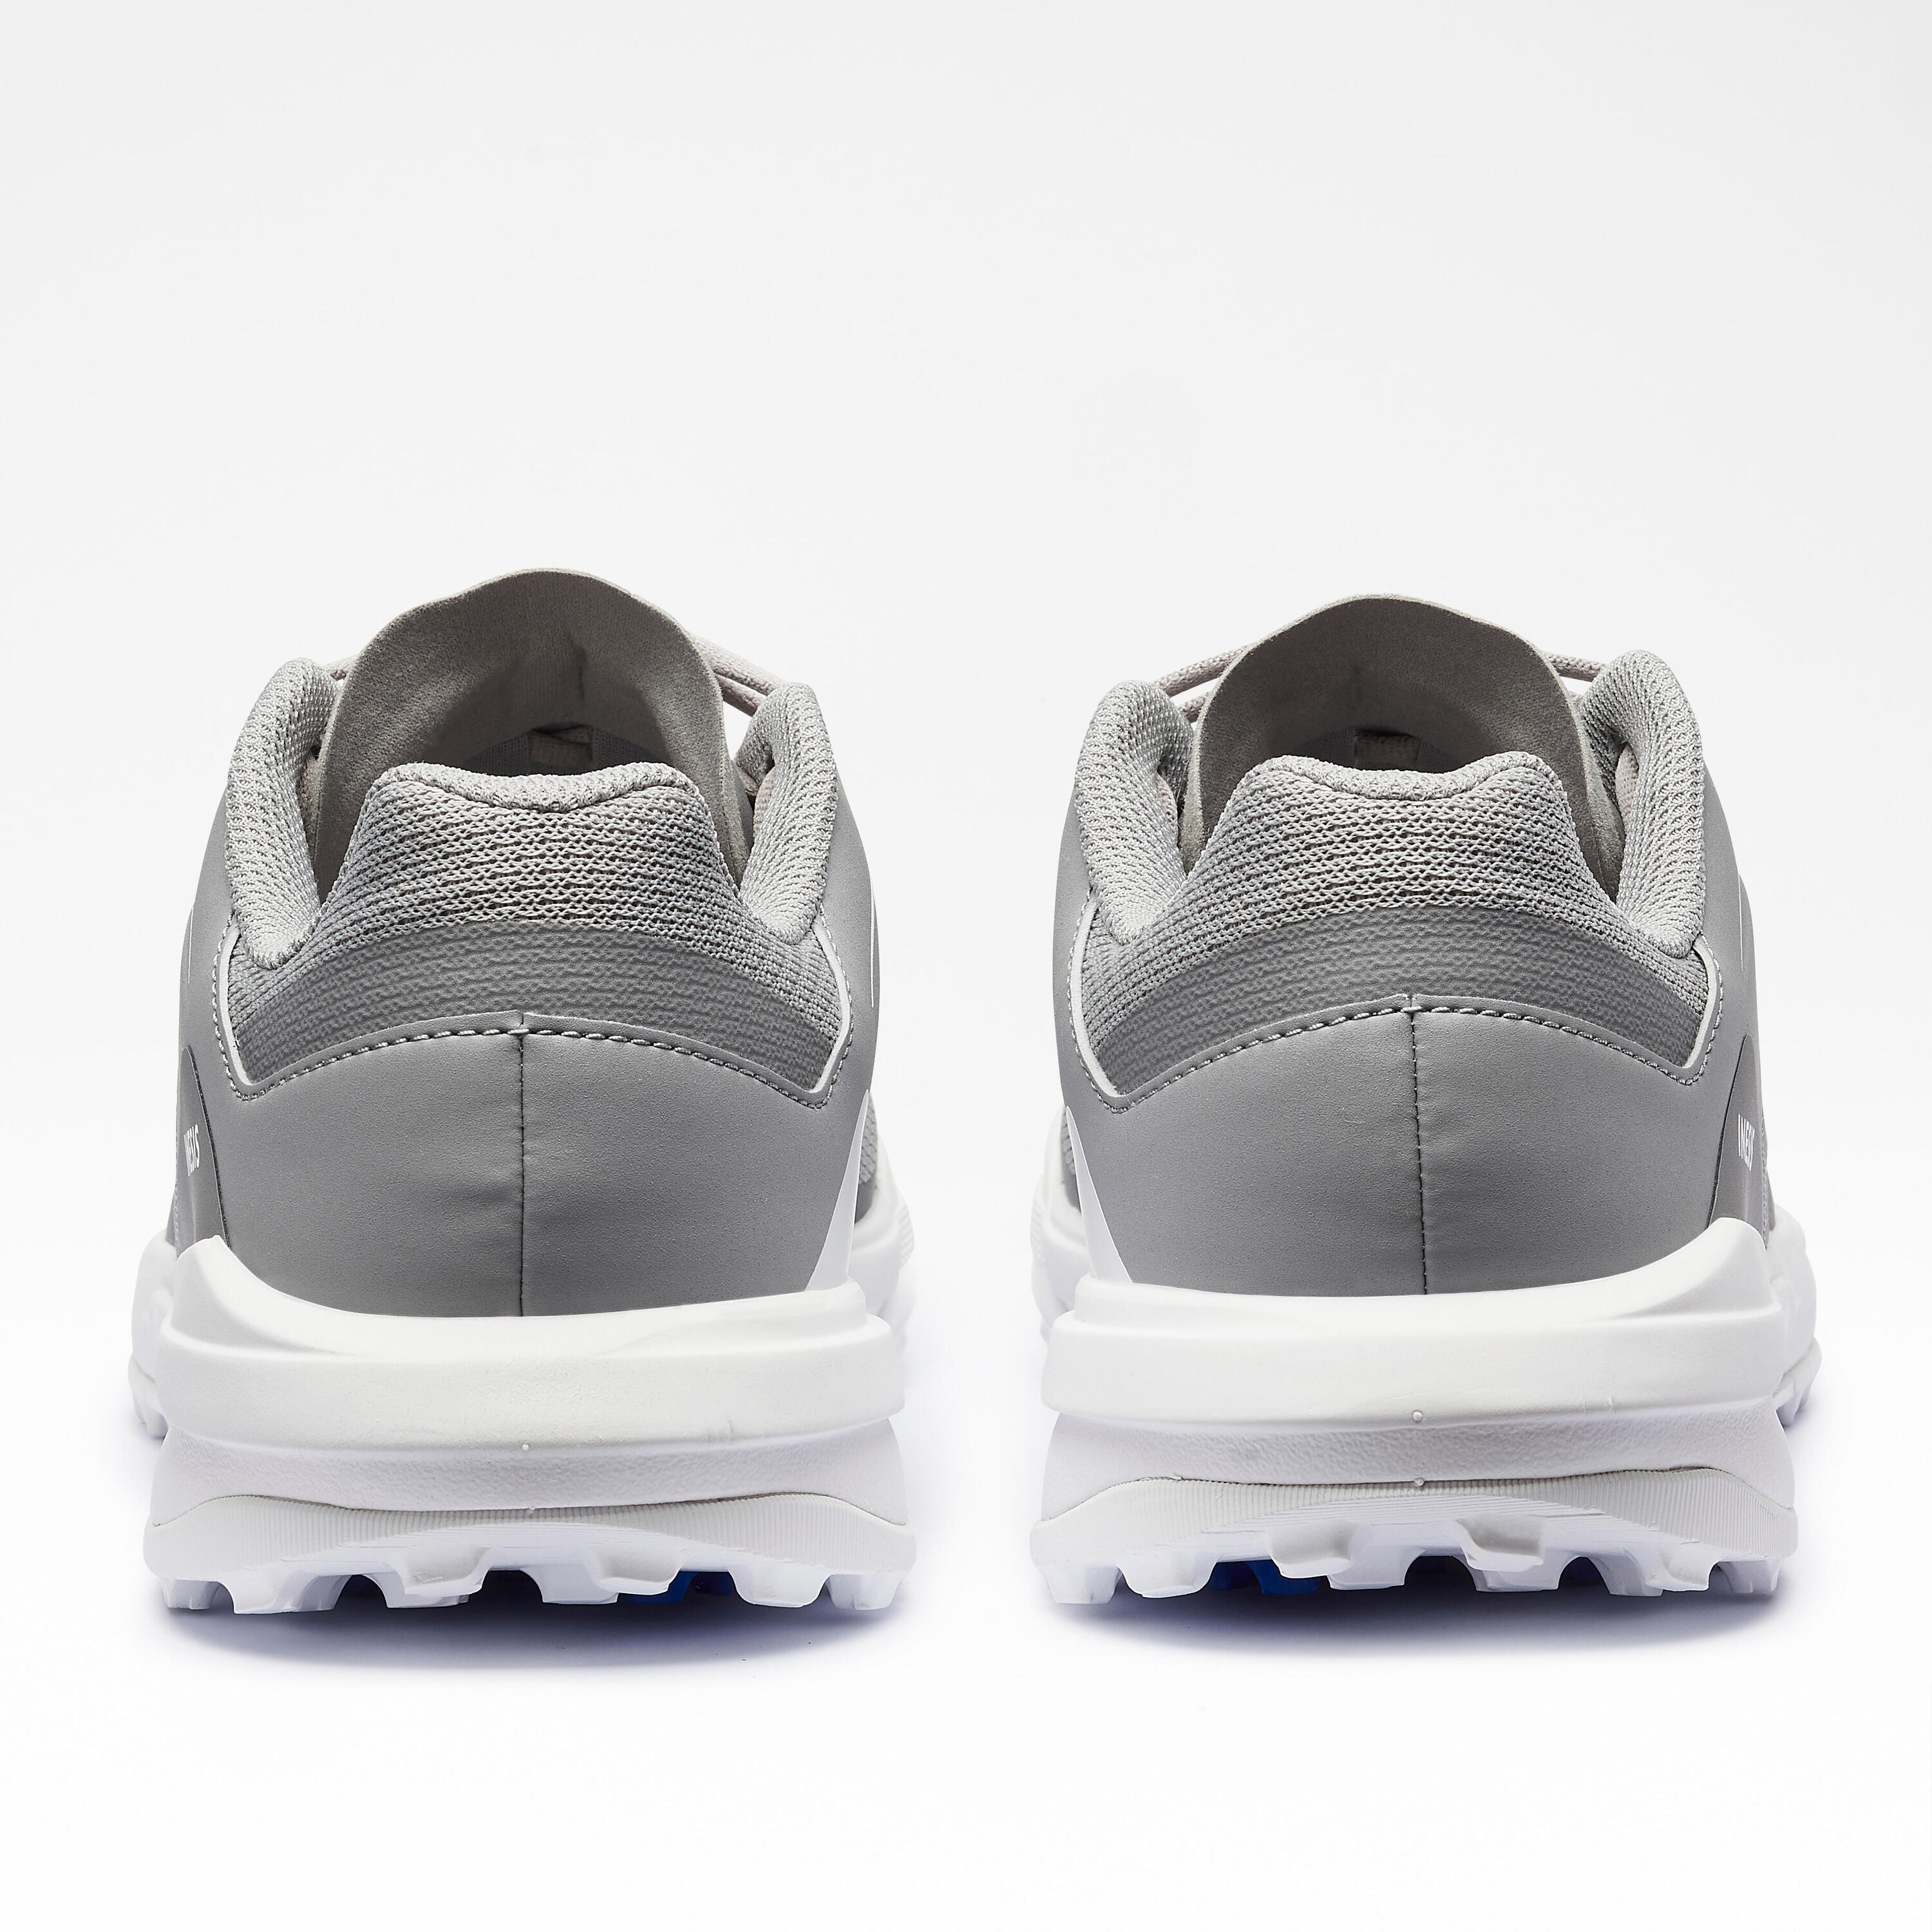 Men's Breathable Golf Shoes - WW 500 Grey 3/5